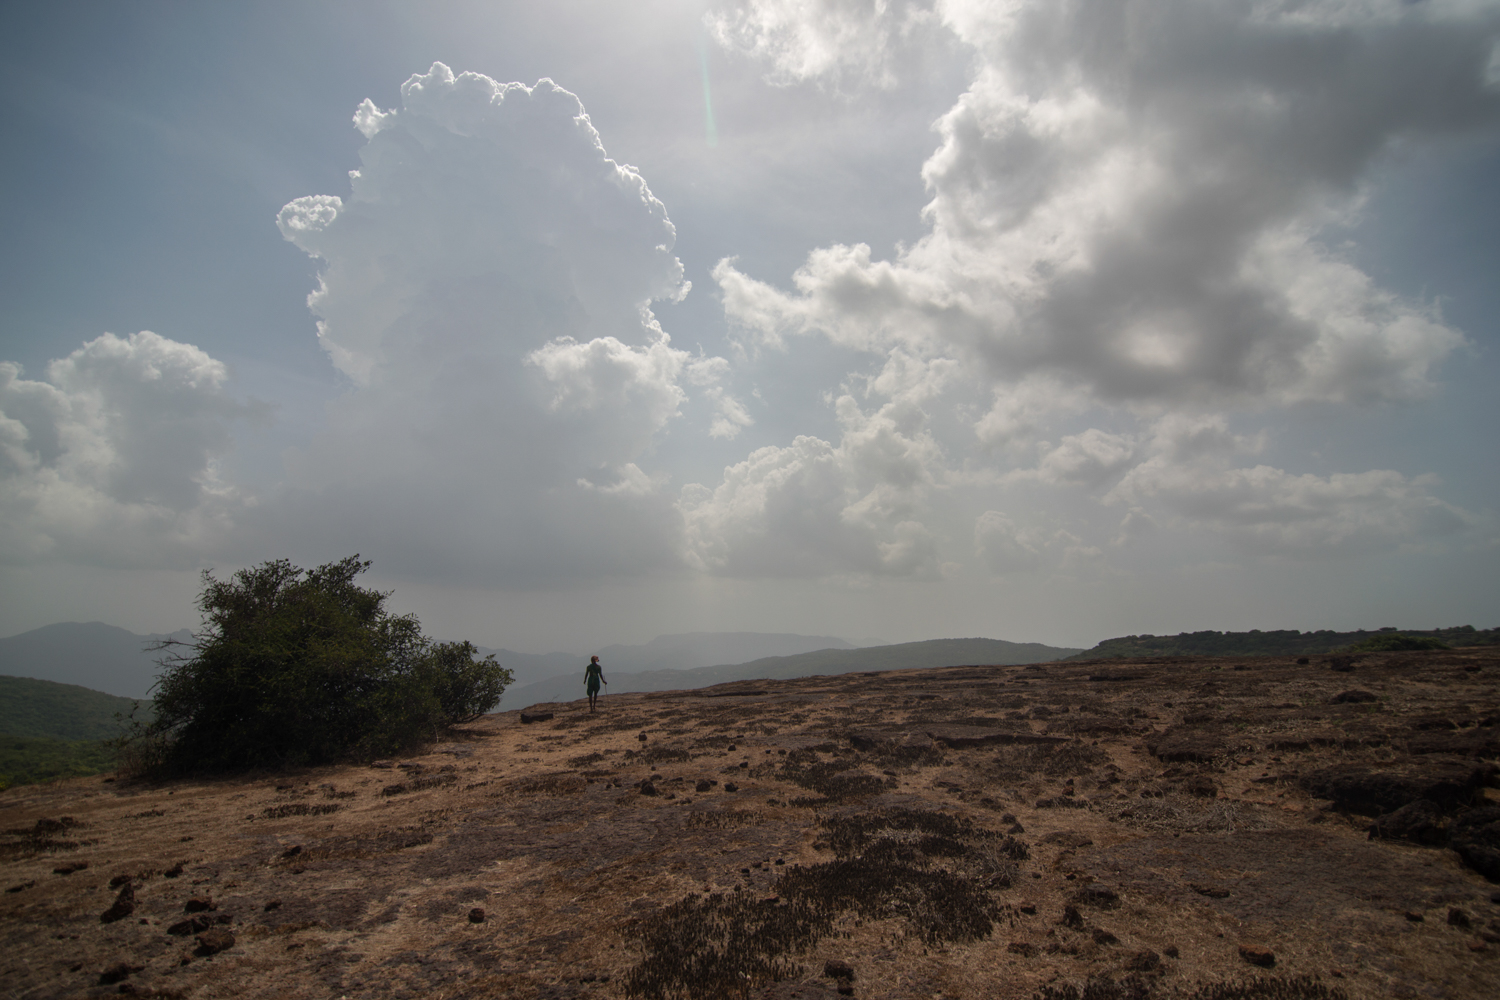  From tiny hamlets of the Koyna Tiger reserve, women bring their livestock to graze on the plateau. This woman stands on the edge of the plateau looking for her cattle. 